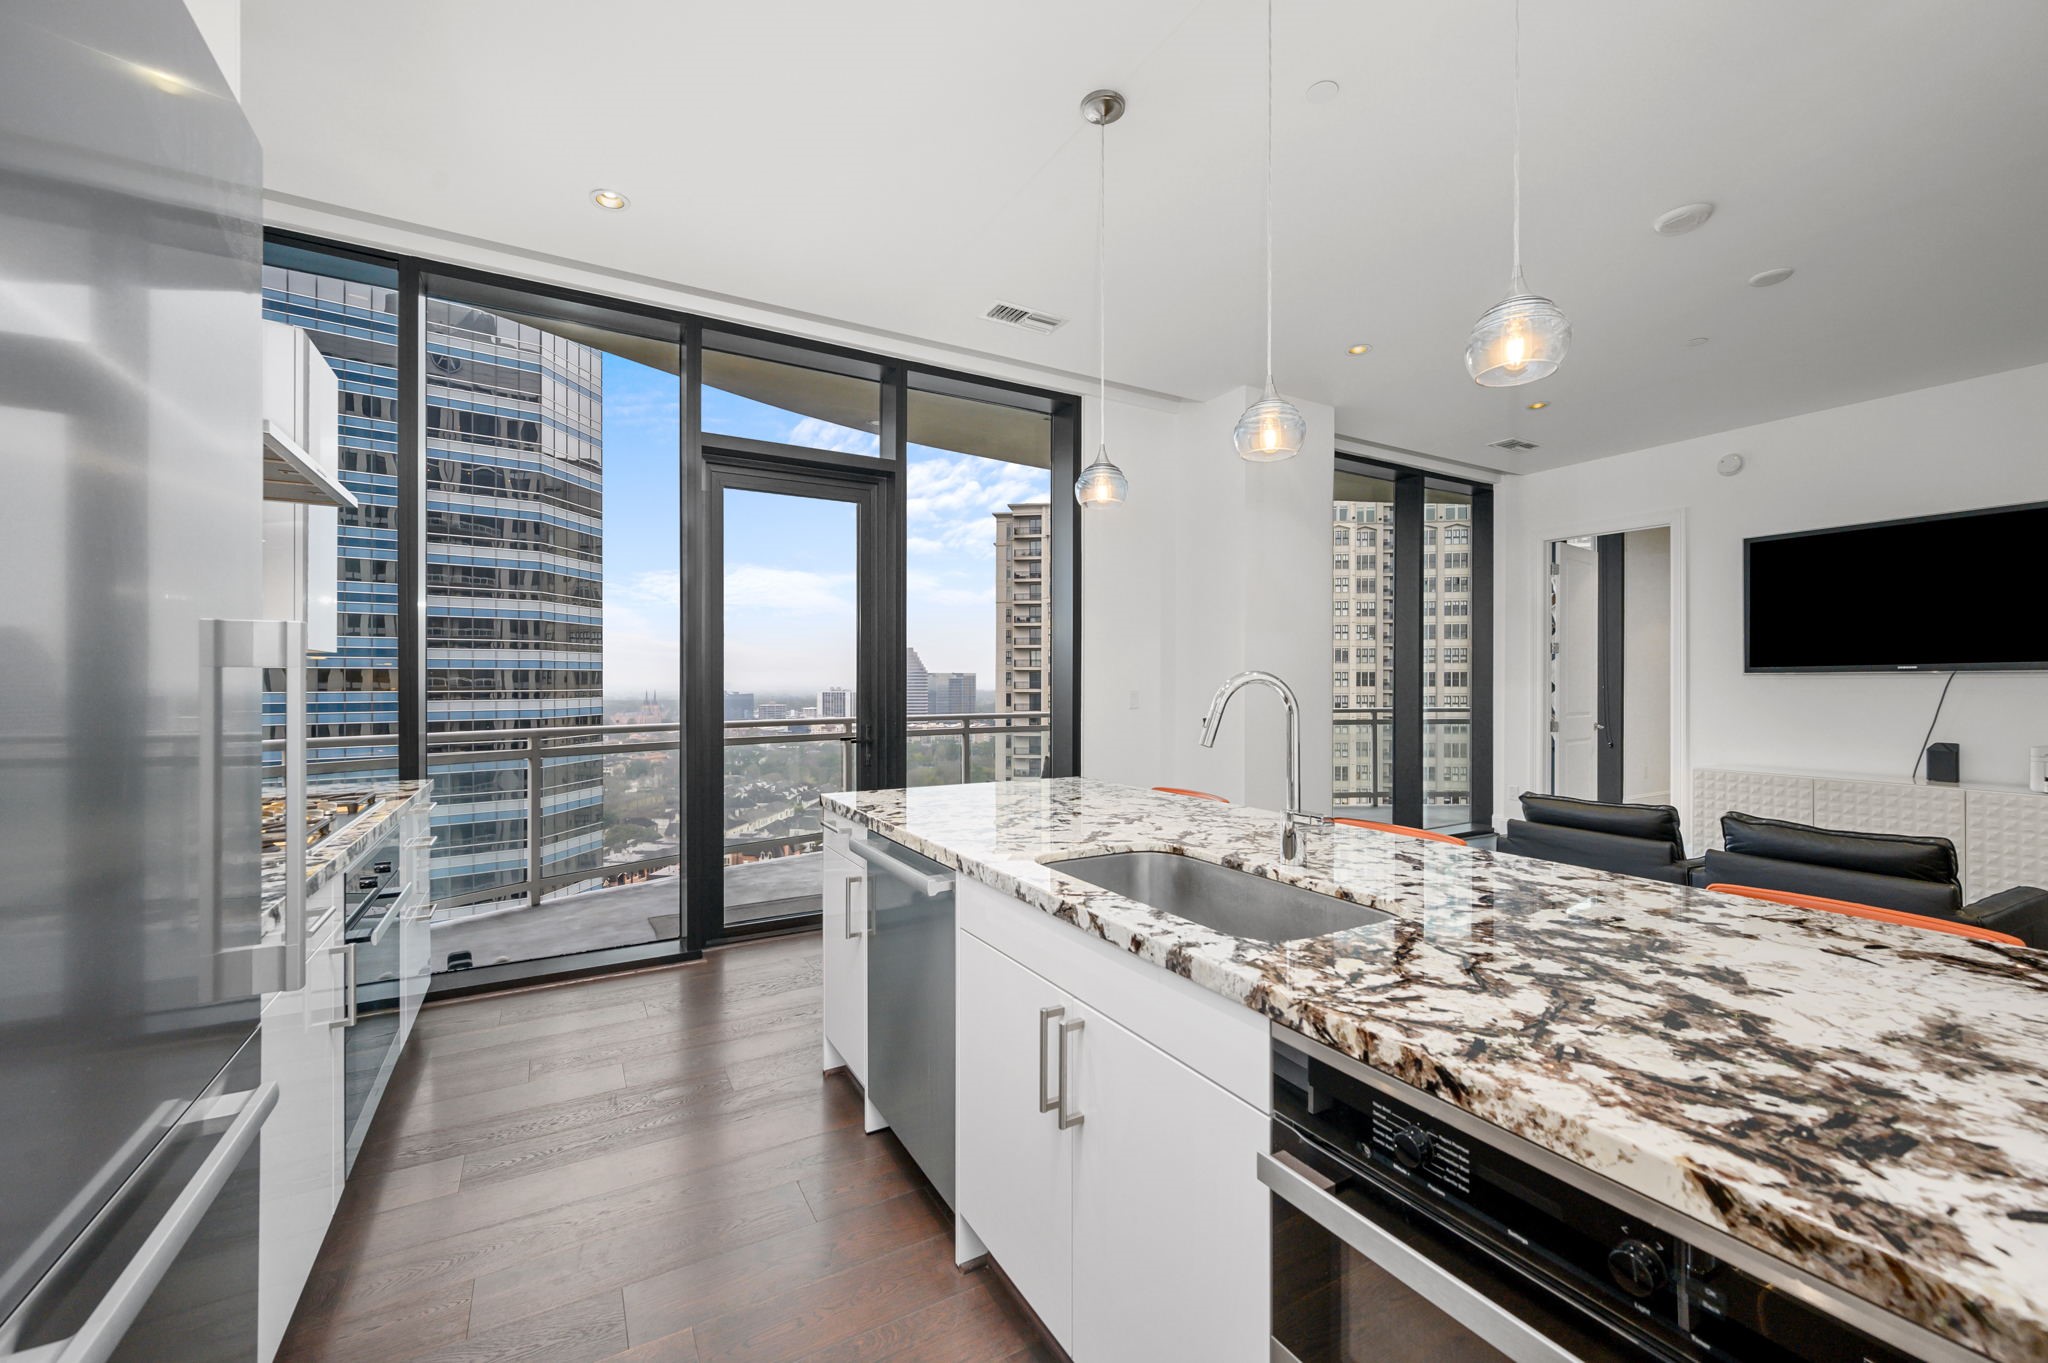 This stunning kitchen has a great view!